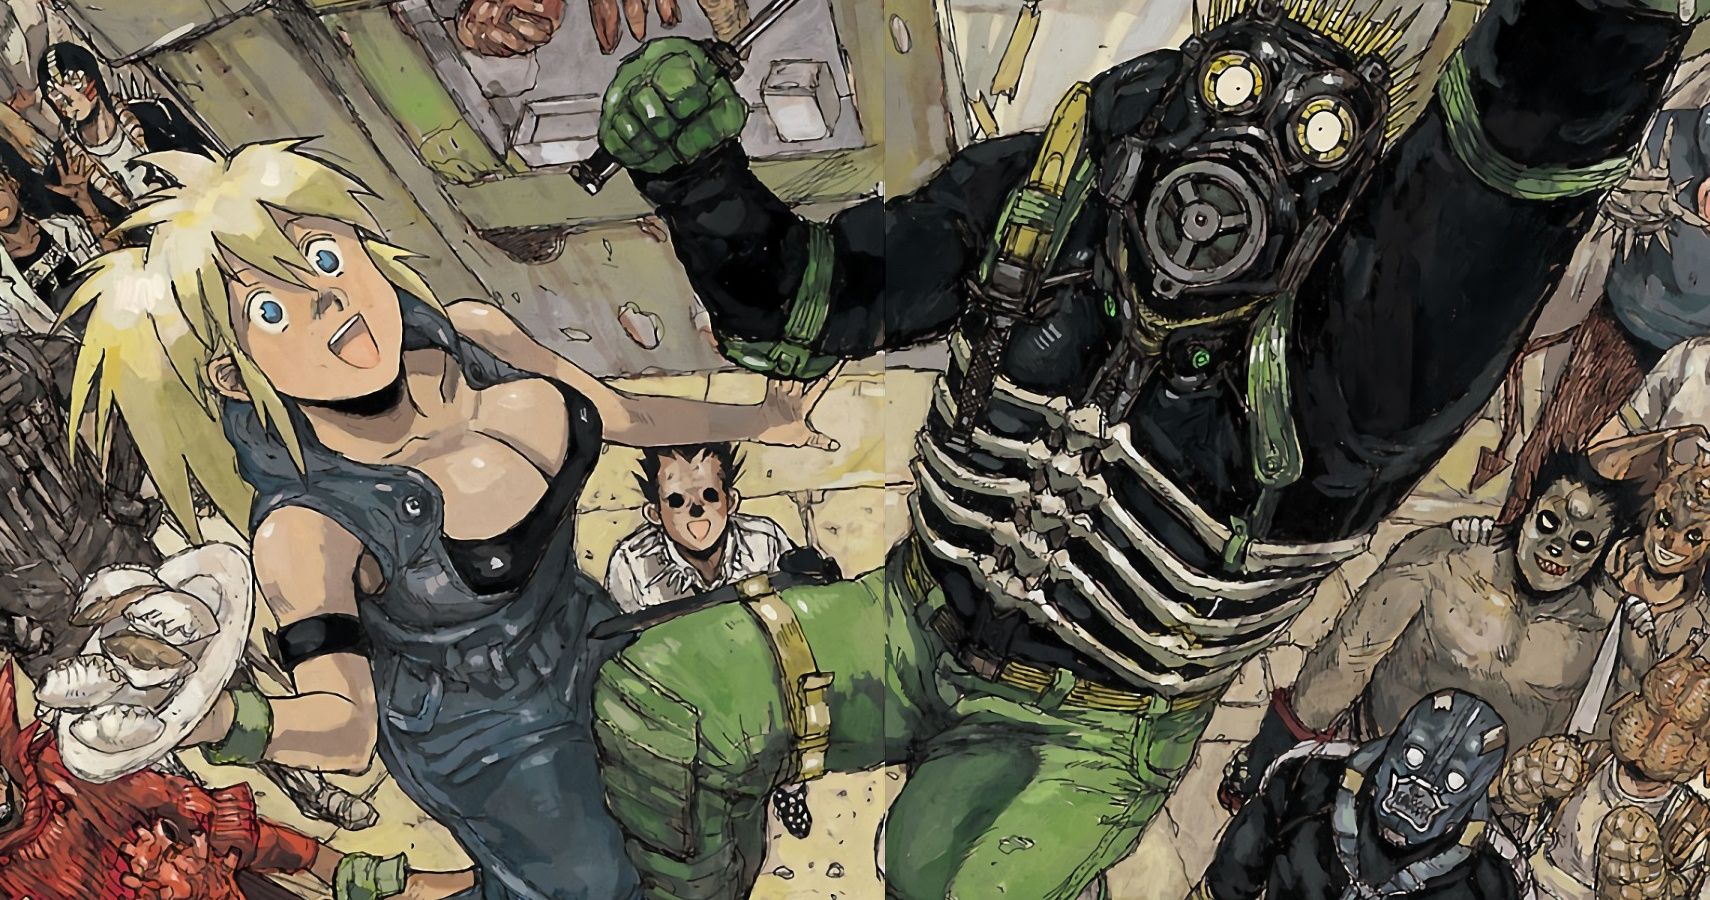 Dorohedoro: 10 Things From The Manga We Can't Wait For In Season 2